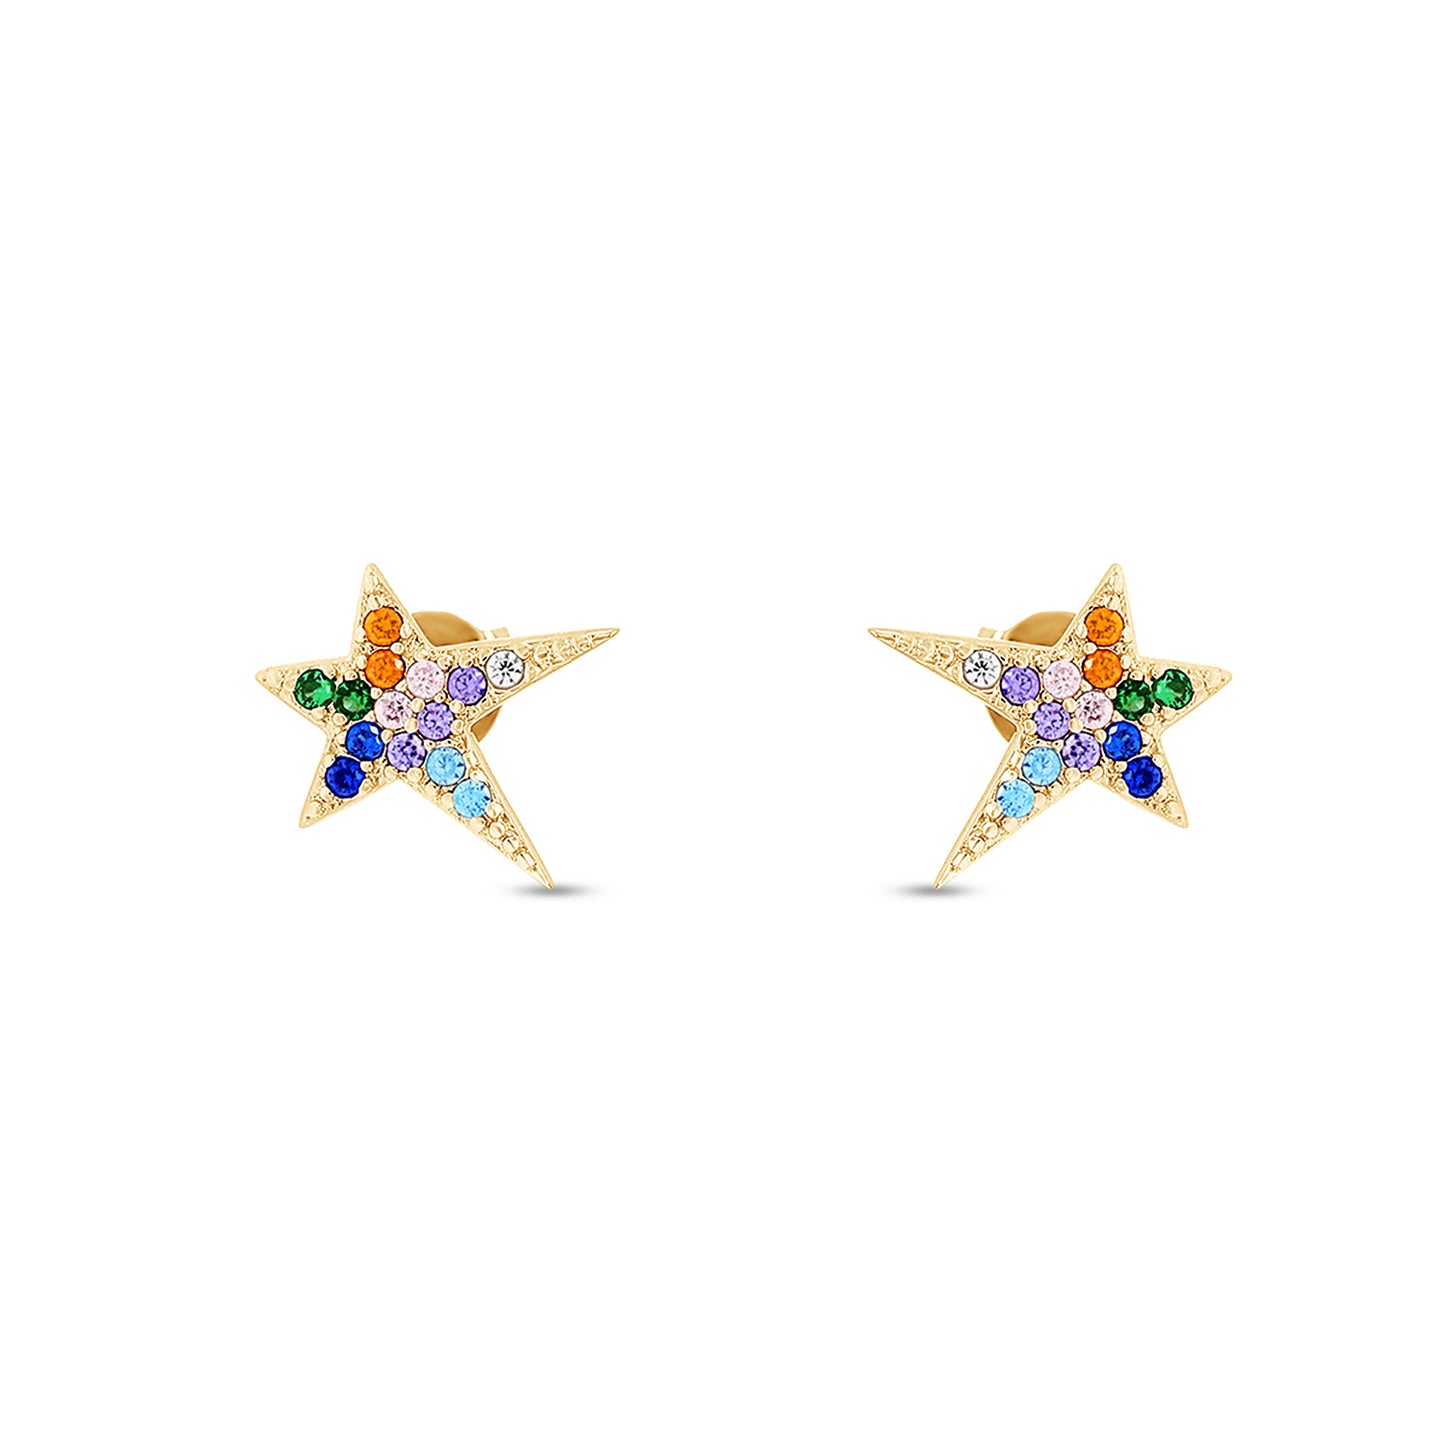 Colourful Rainbow Cubic Zirconia Tiny Dainty Starburst Stud Earrings For Women In 14K Gold Plated 925 Sterling Silver